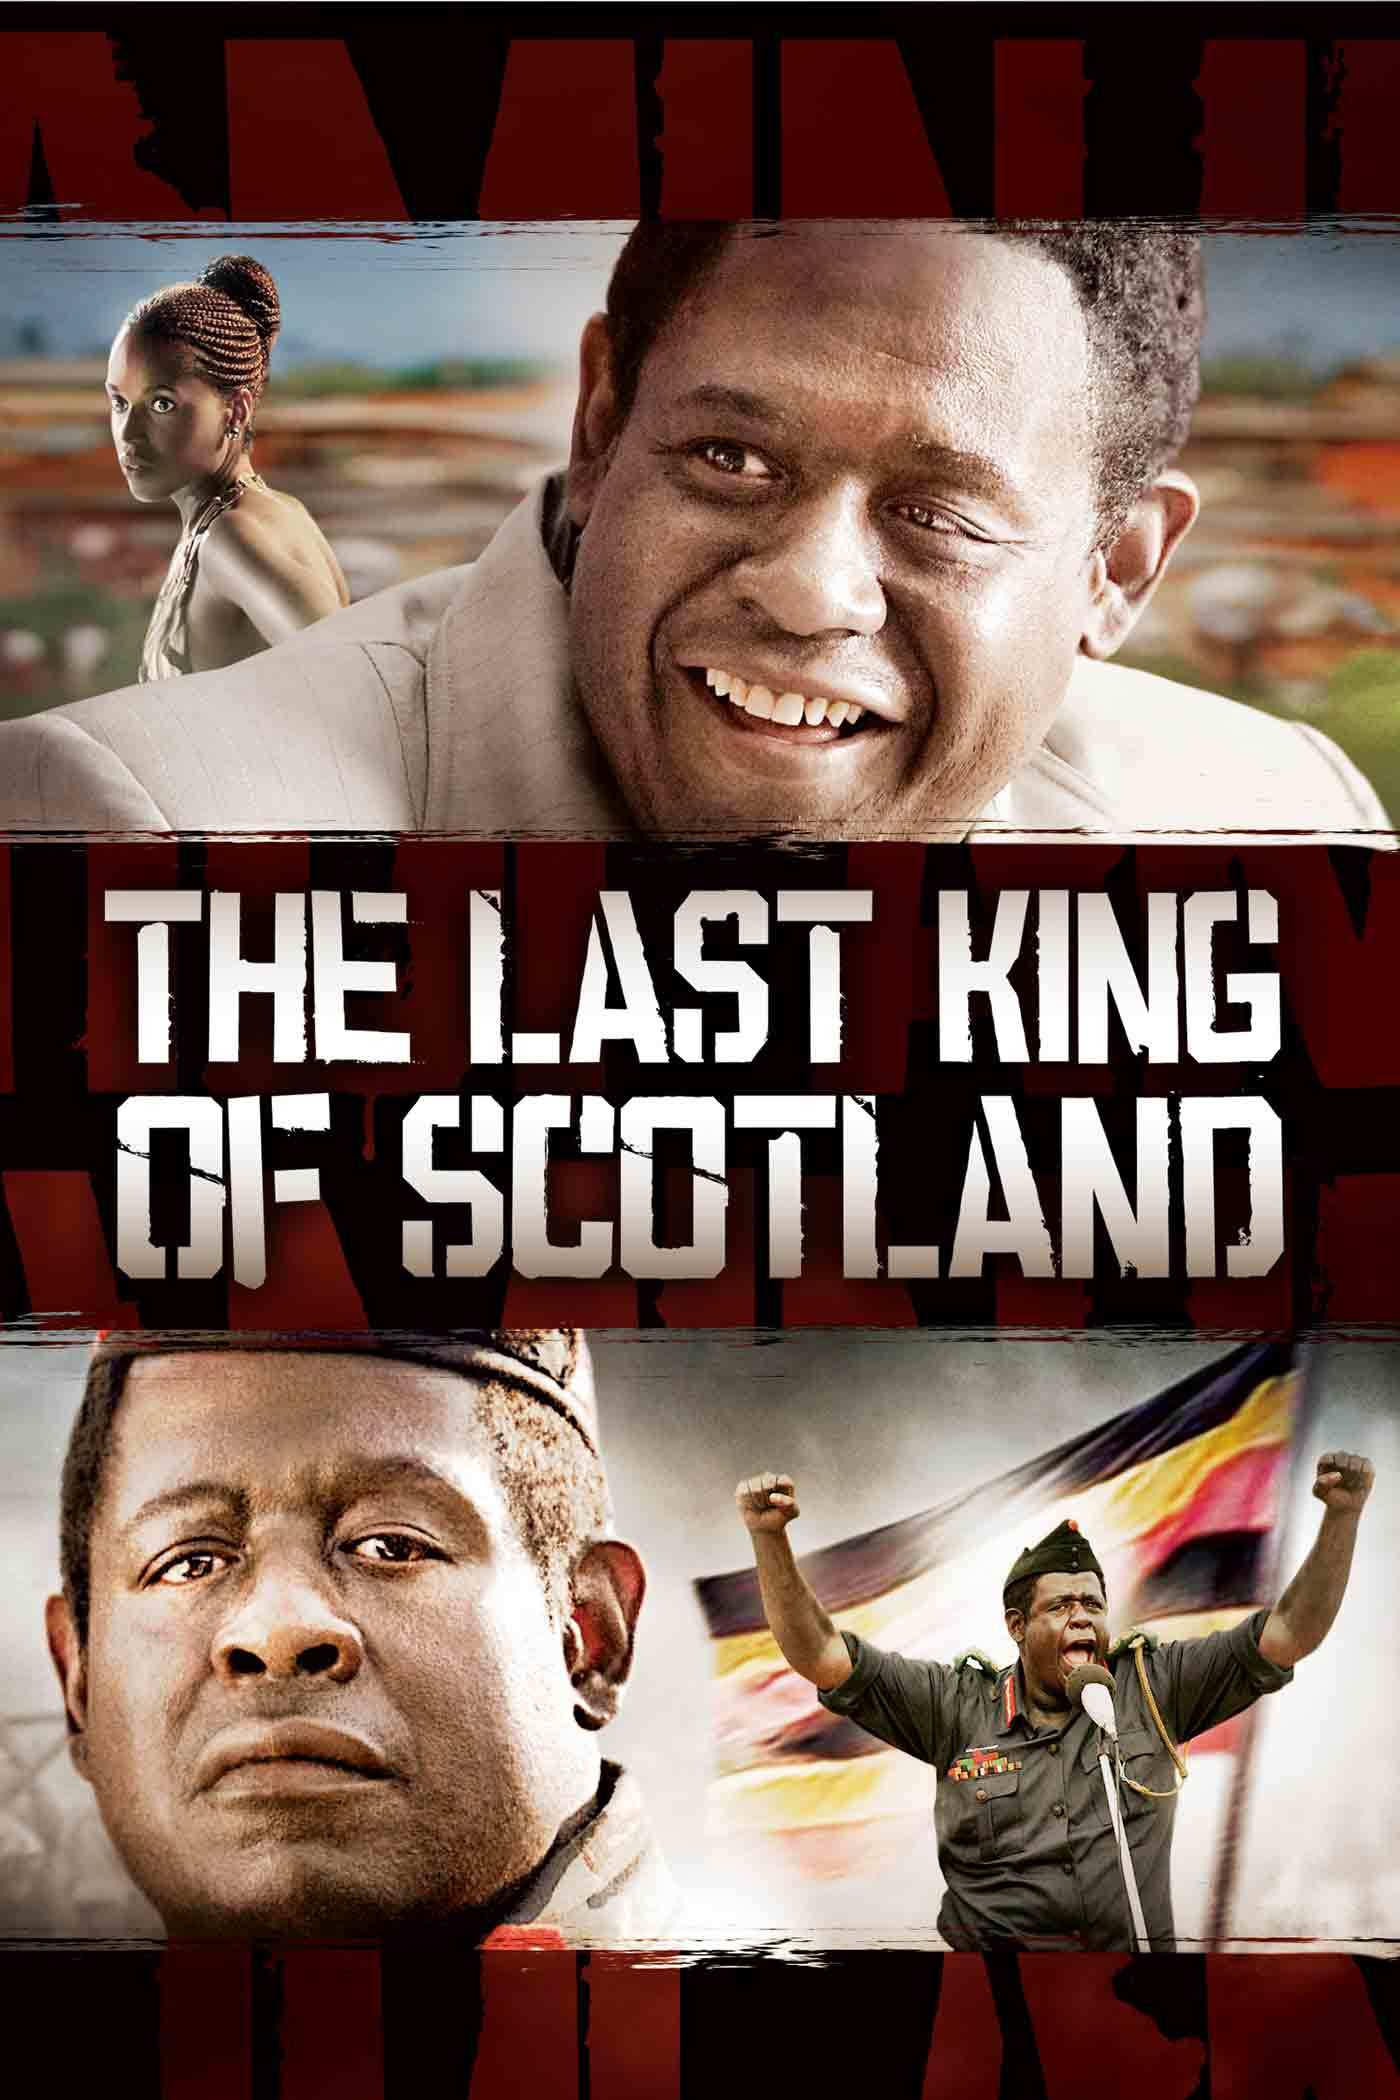 The Last King of Scotland movie poster